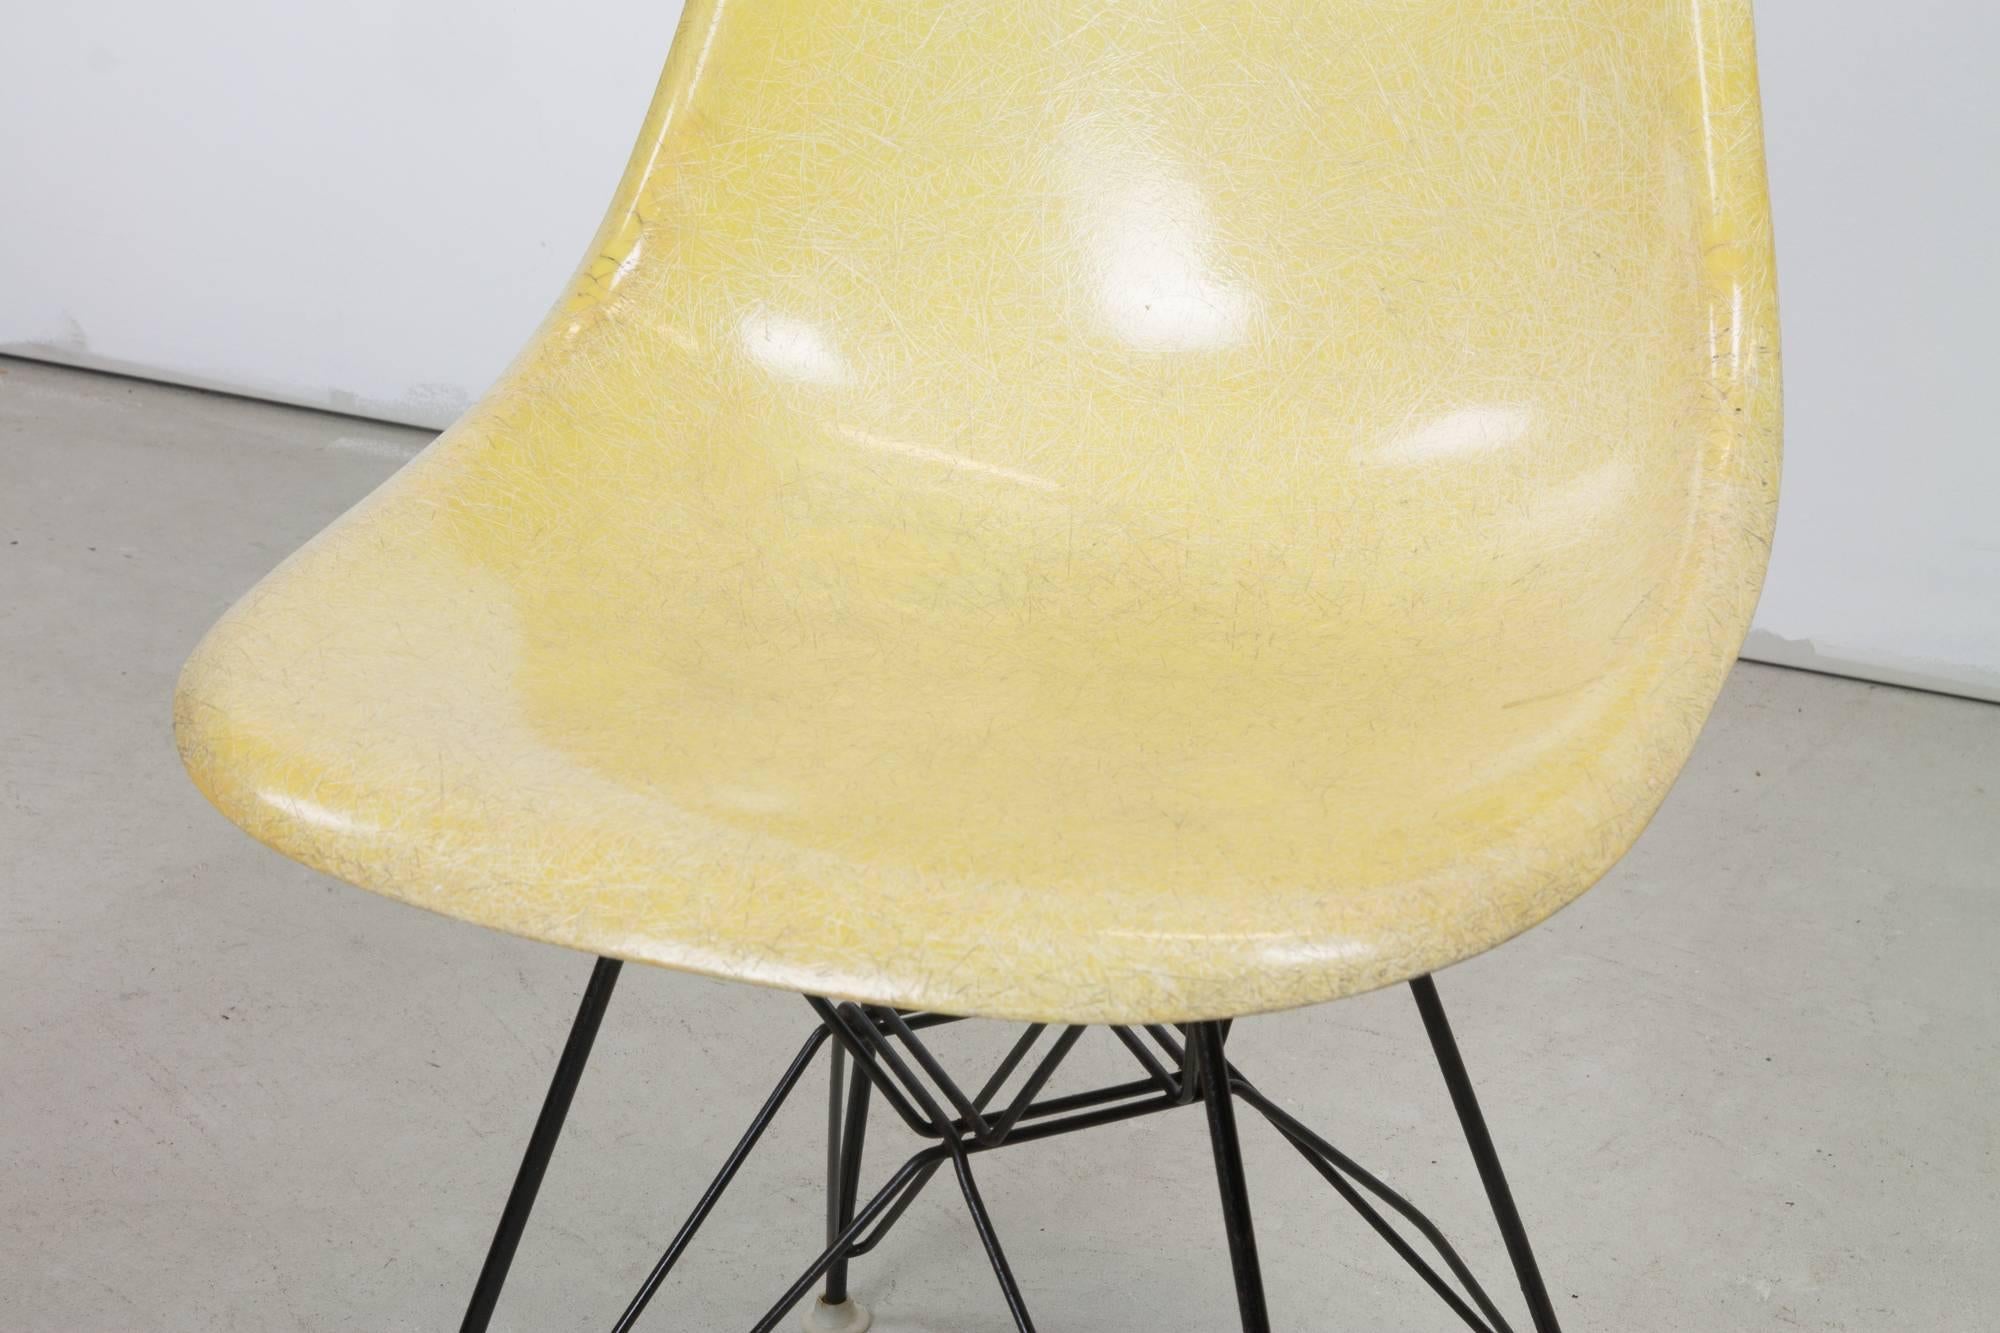 Herman Miller Eames DSR fiberglass chair on Eiffel base in bright yellow. Base has excellent patina and original glides and shock mounts.